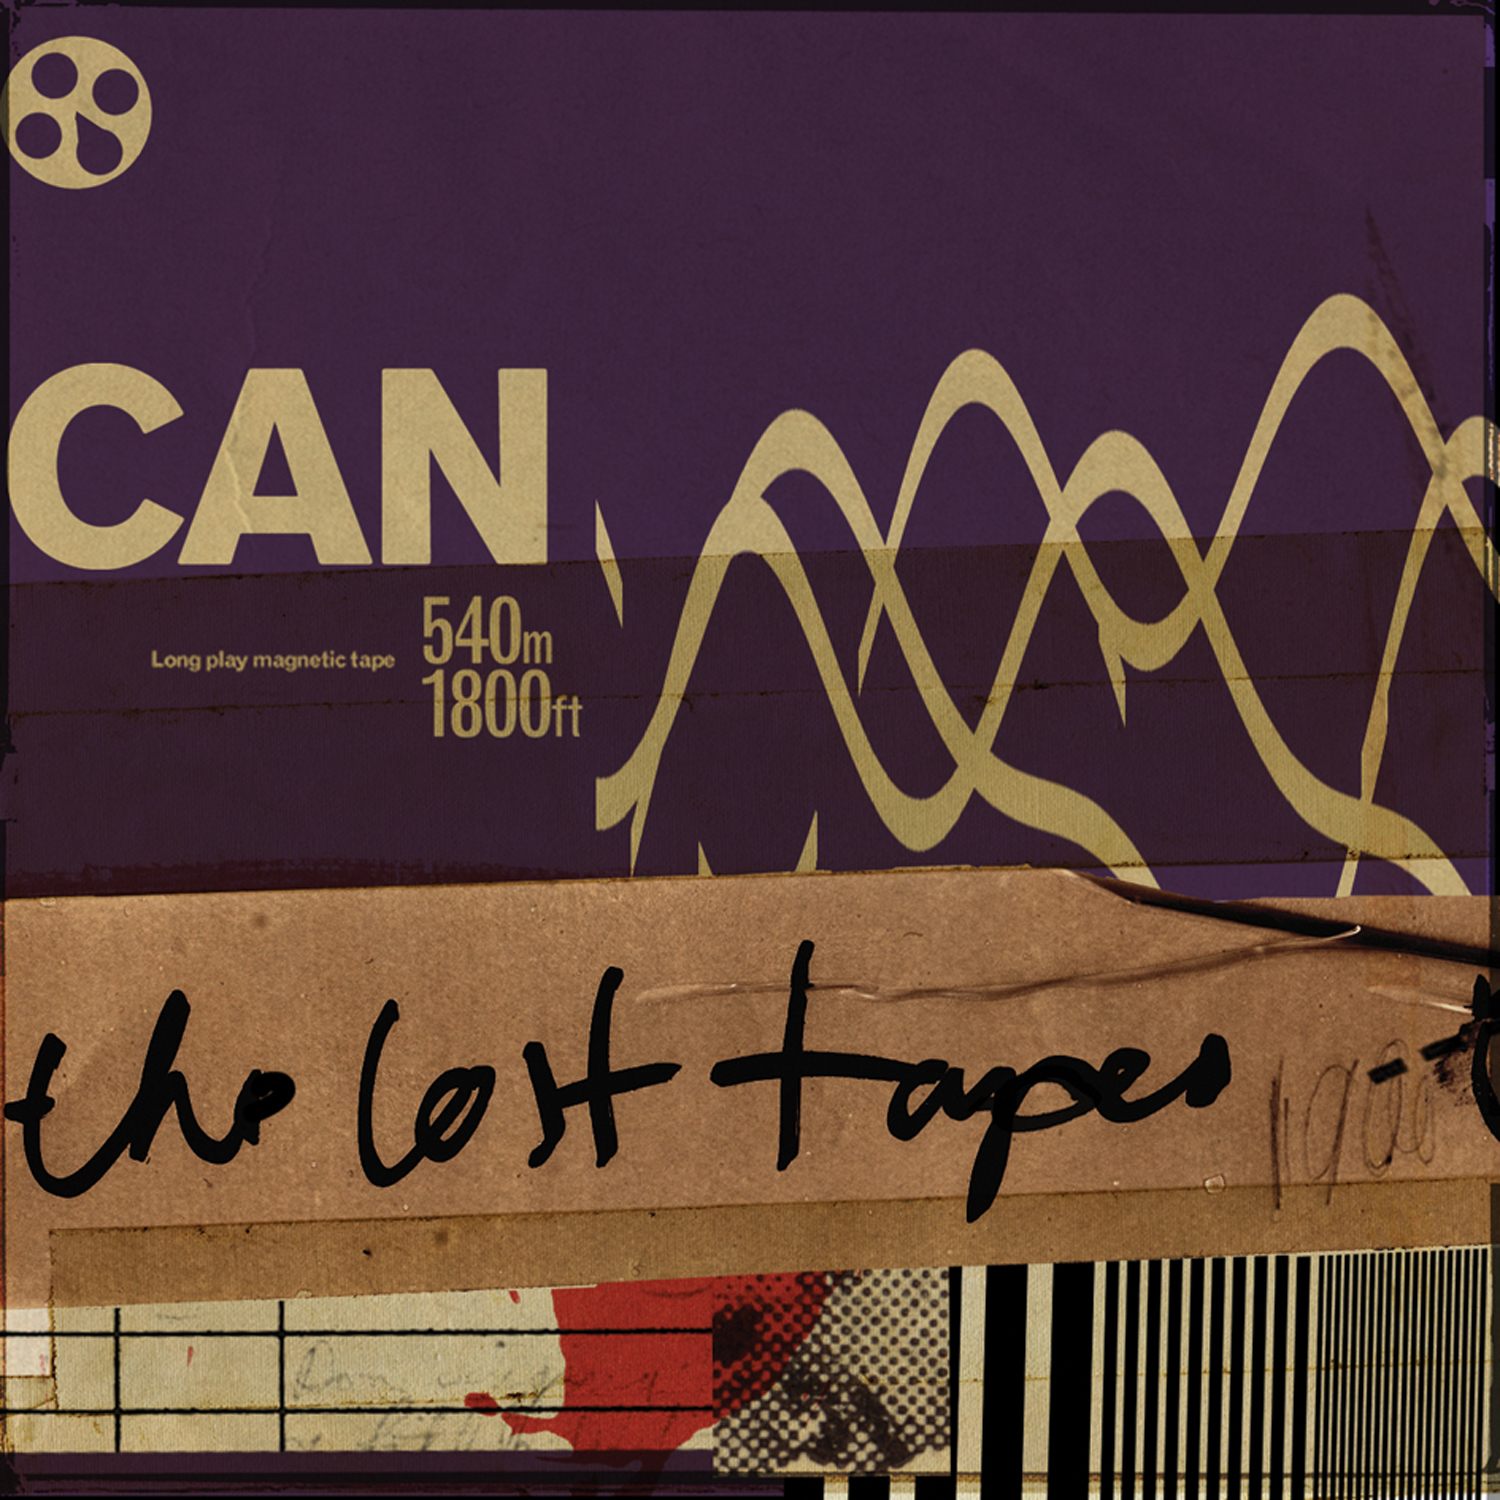 CAN - The Lost Tapes CD Cover